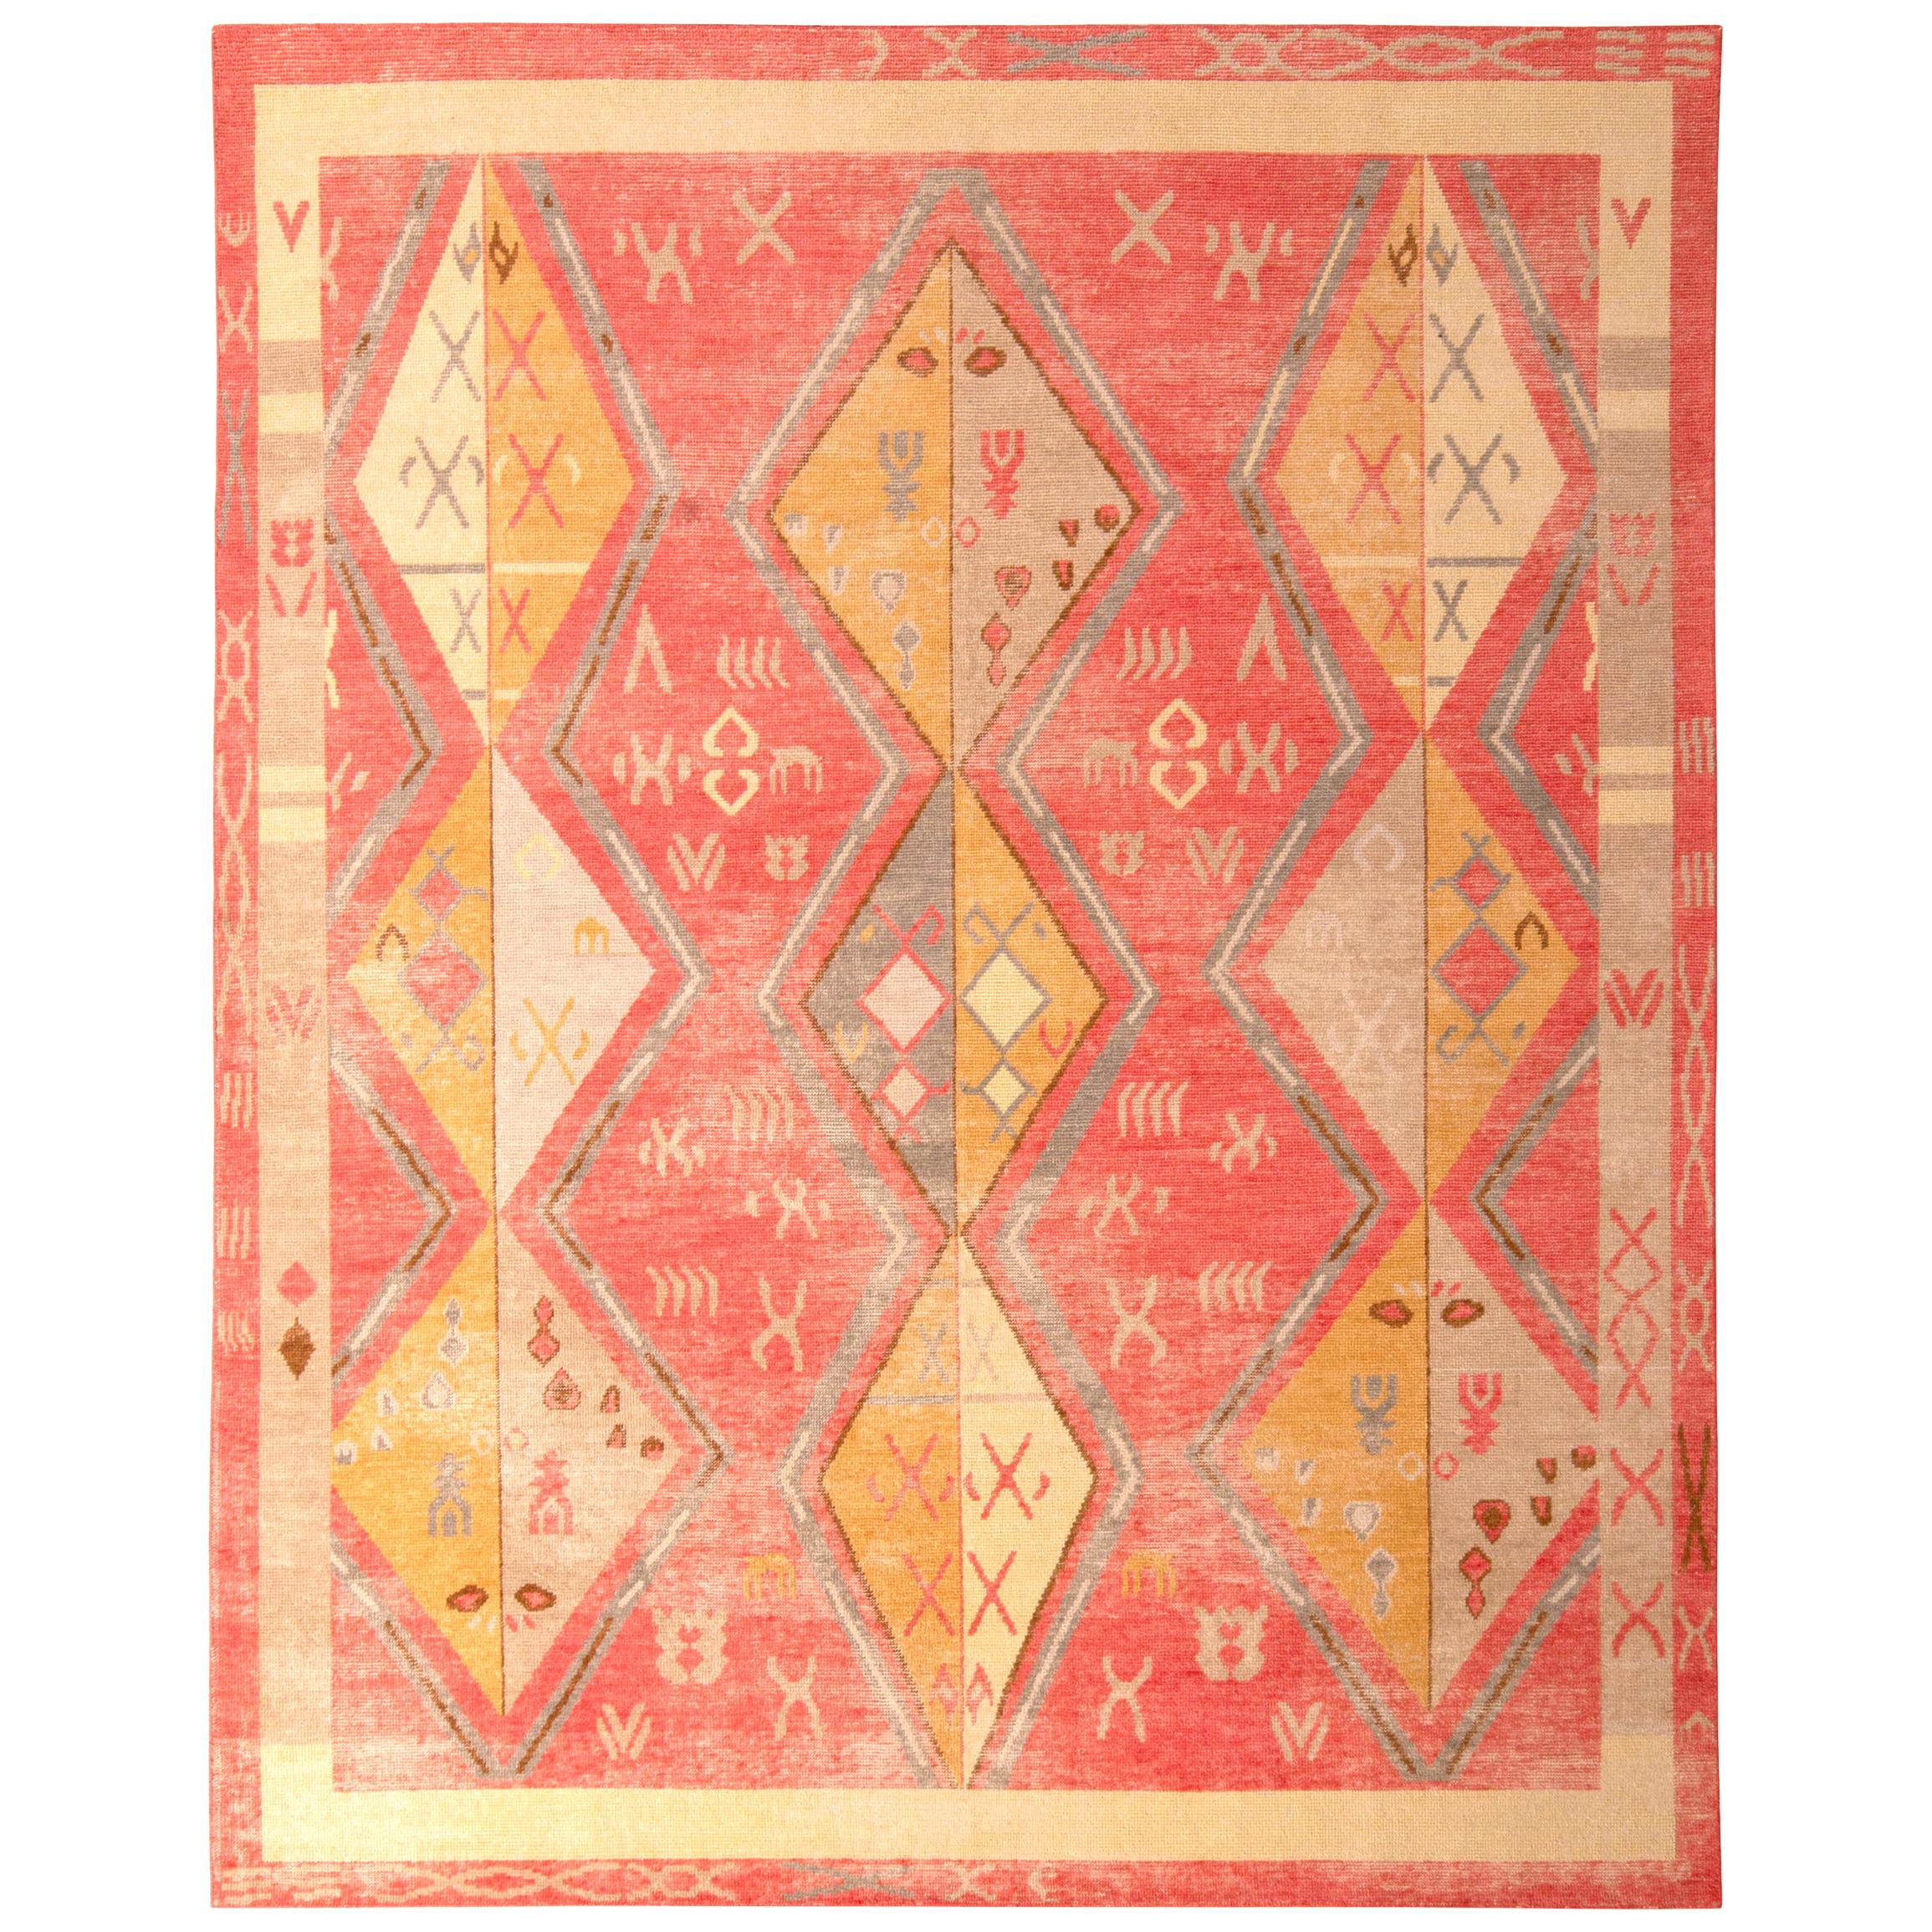 Rug & Kilim's Hand-Knotted Tribal-Style Rug, Red Gold Diamond Pattern